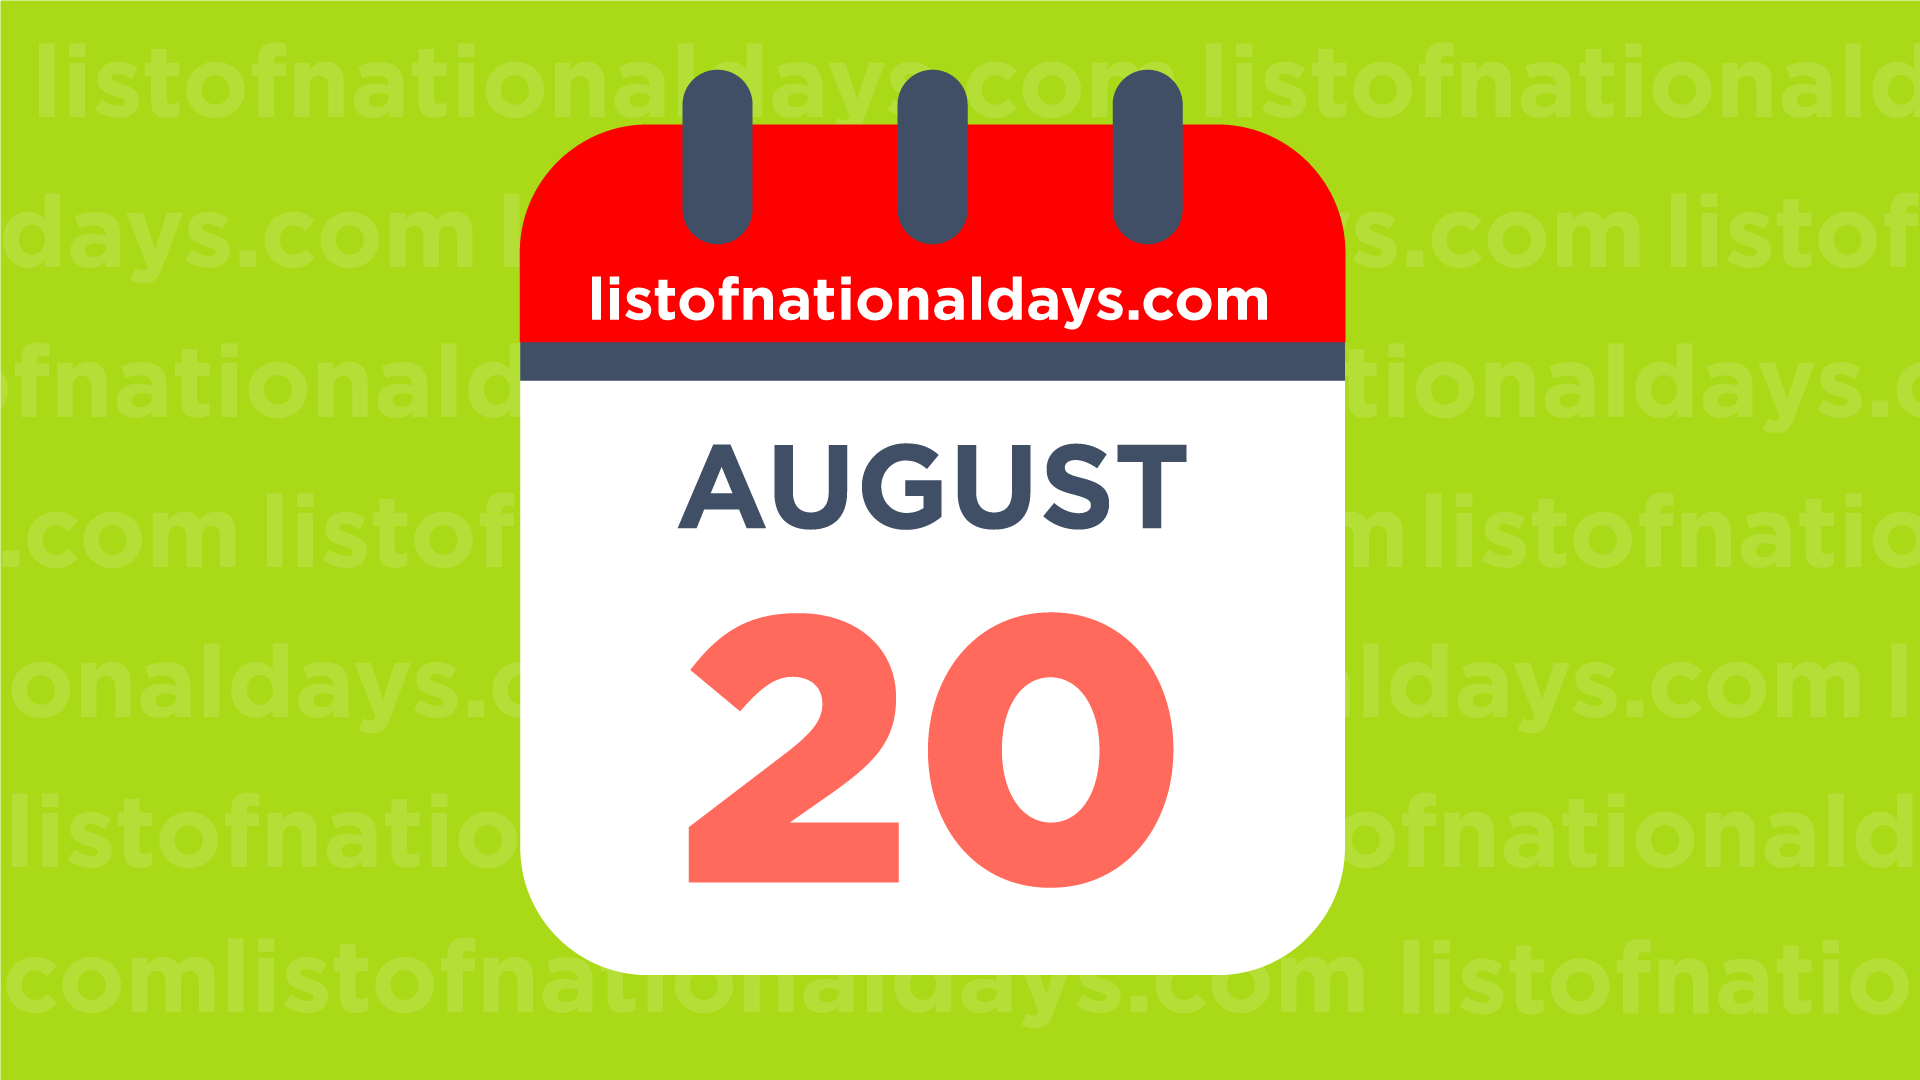 August 20th: National Holidays,Observances and Famous Birthdays